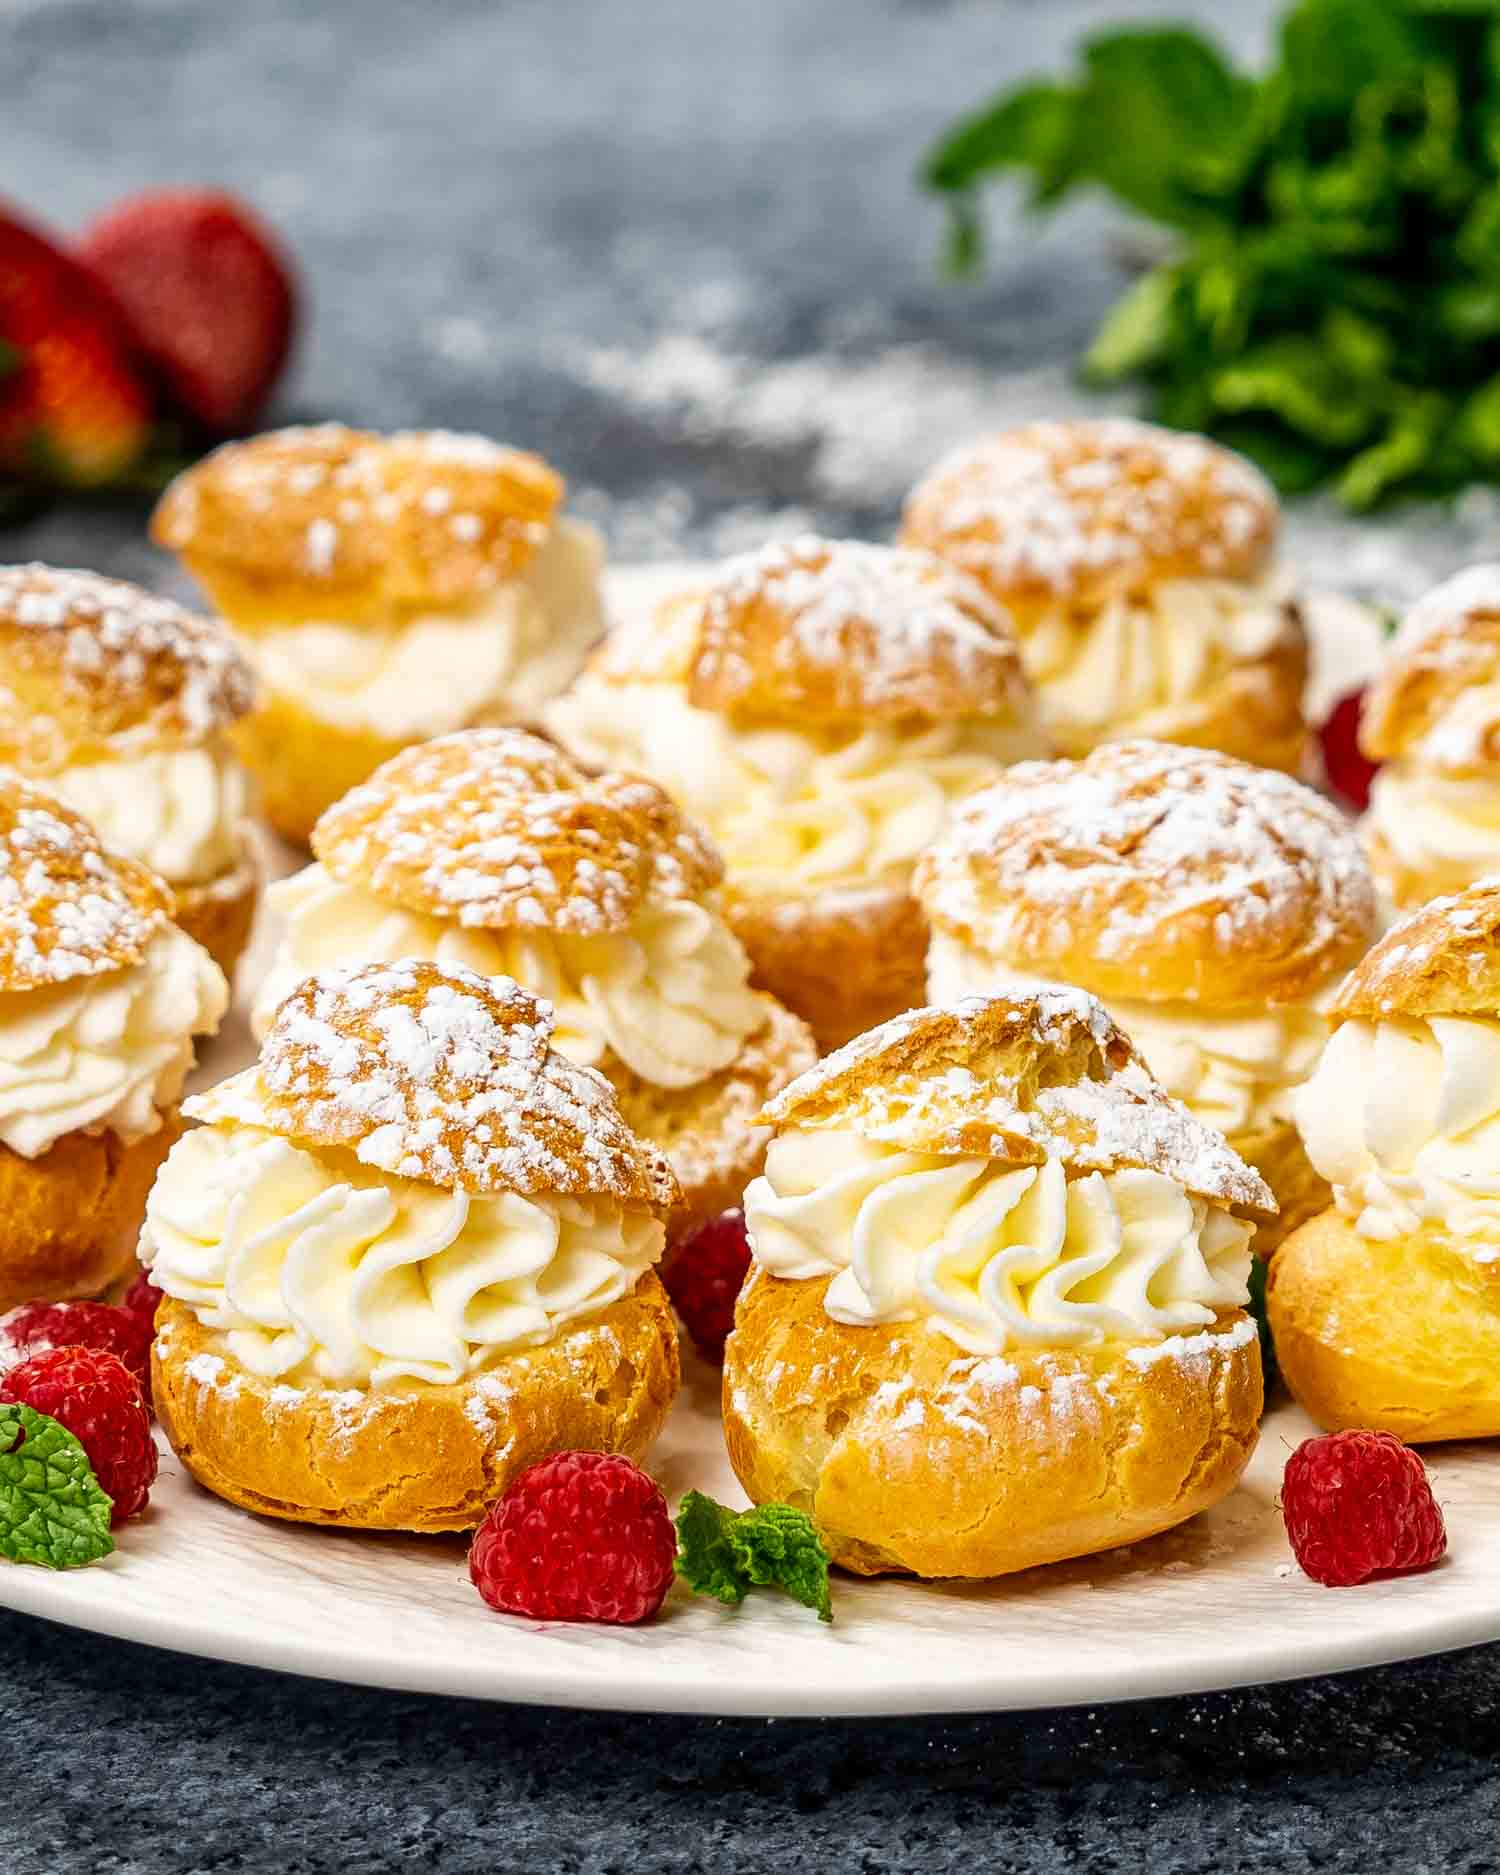 puffs (choux pastry) filled with whipped cream on a platter.